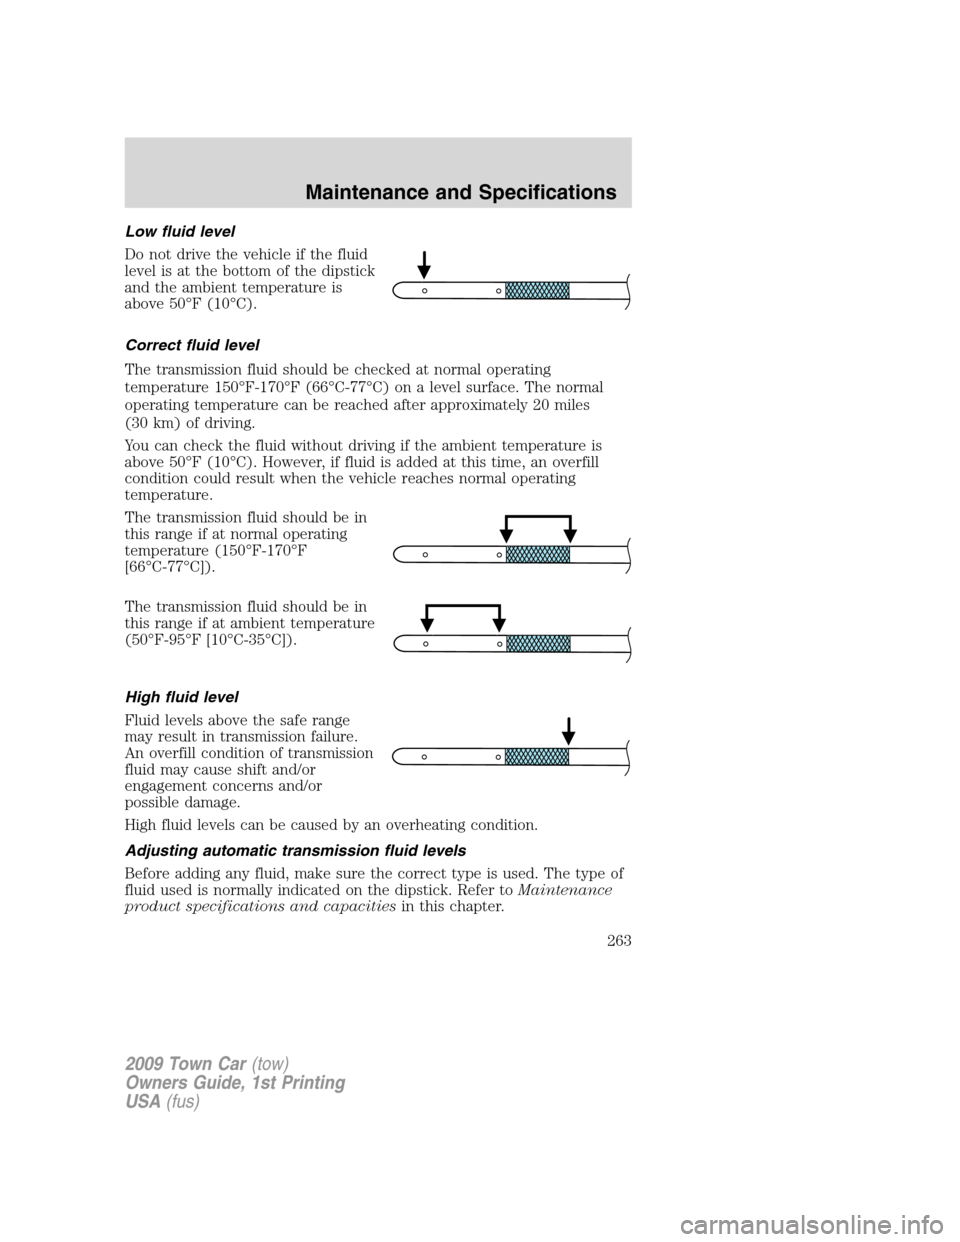 LINCOLN TOWN CAR 2009  Owners Manual Low fluid level
Do not drive the vehicle if the fluid
level is at the bottom of the dipstick
and the ambient temperature is
above 50°F (10°C).
Correct fluid level
The transmission fluid should be ch